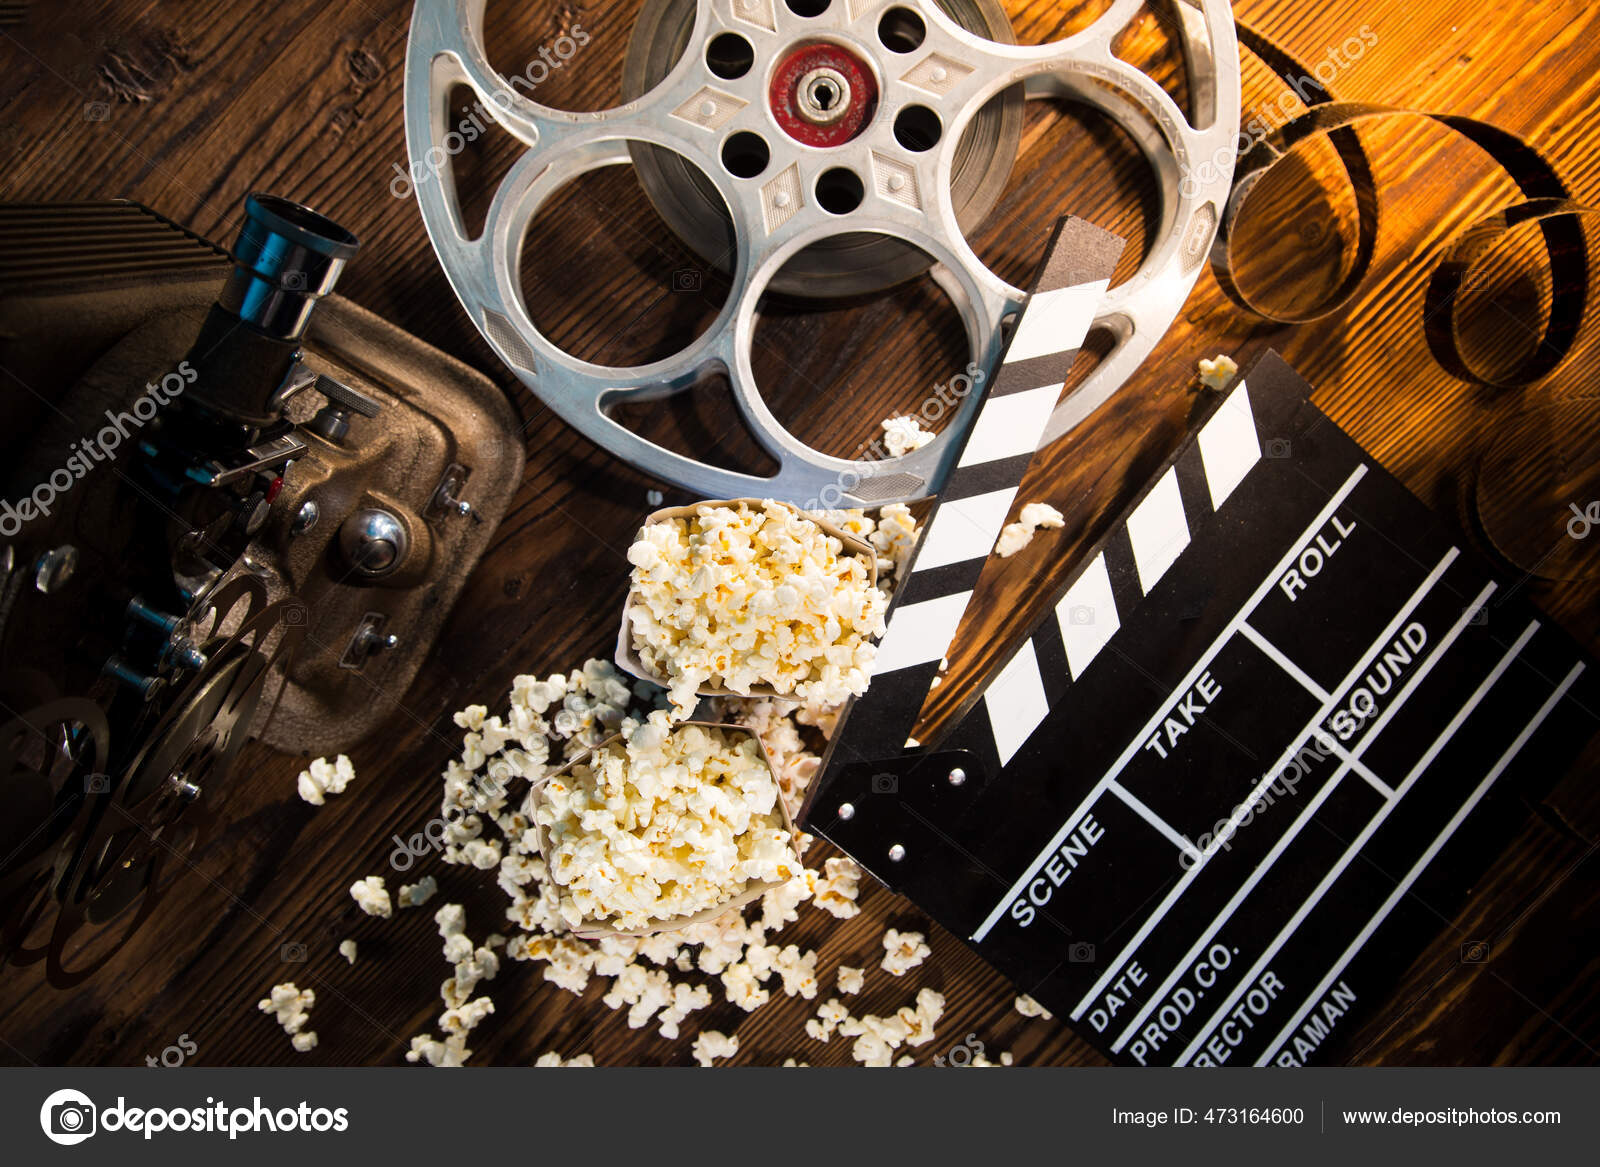 Cinema concept of vintage film reels, clapperboard and other tools — Stock  Photo © Kesu01 #473164600